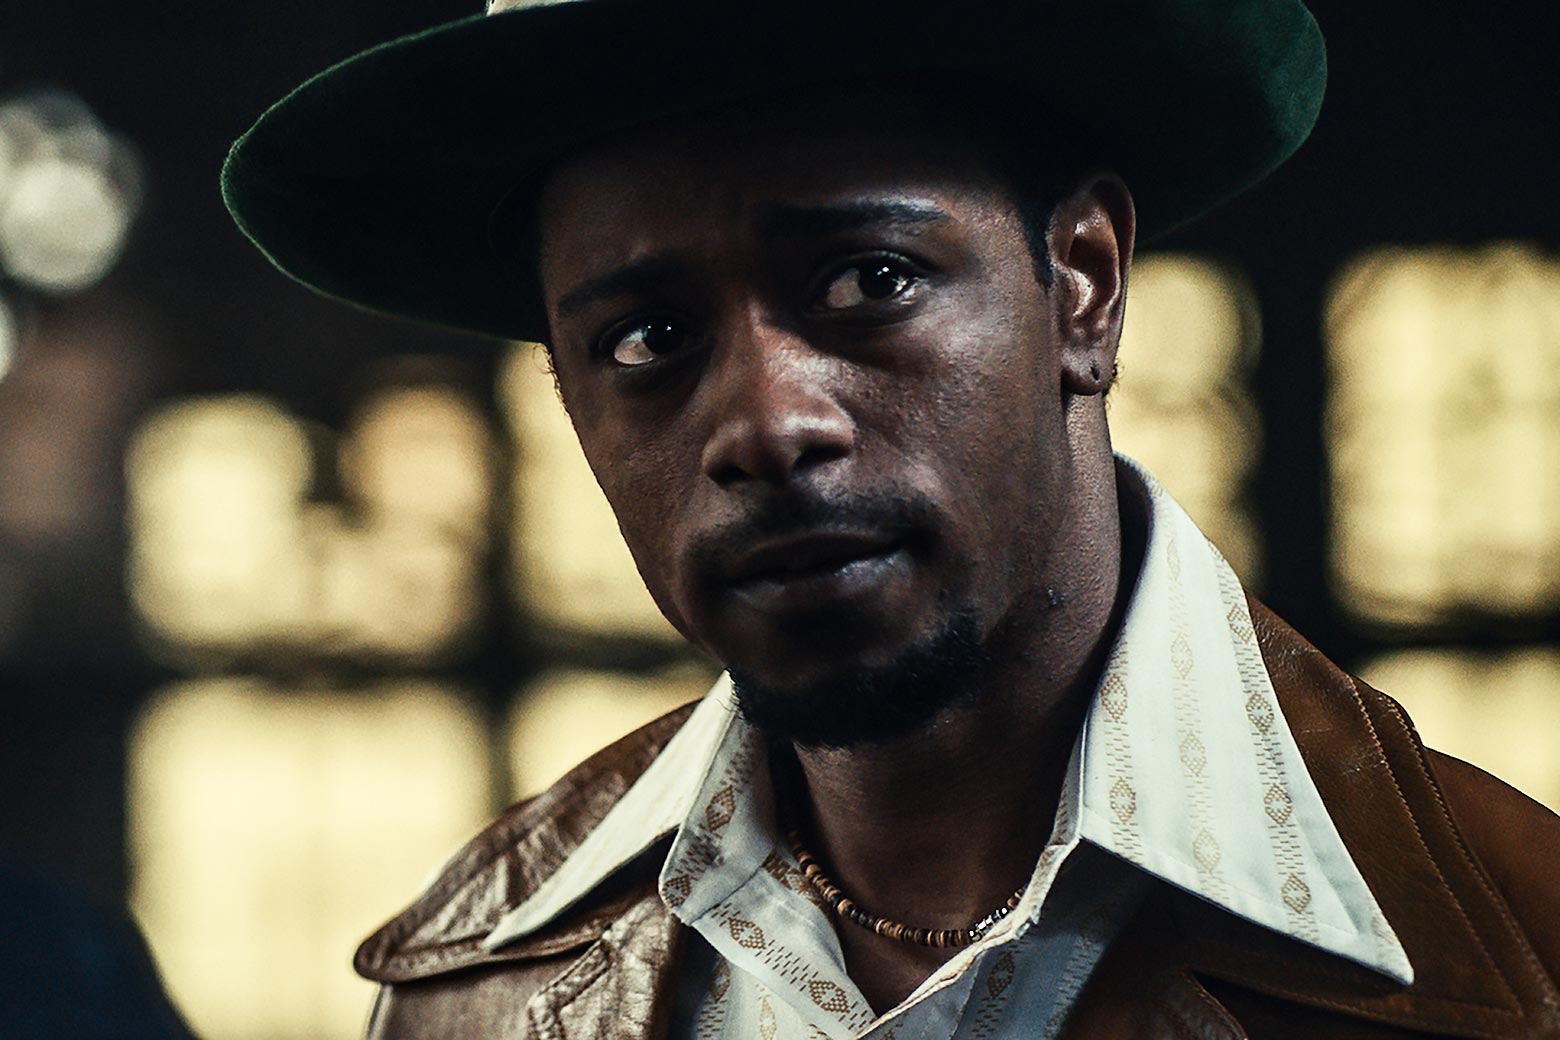 Lakeith Stanfield in a still from the movie.